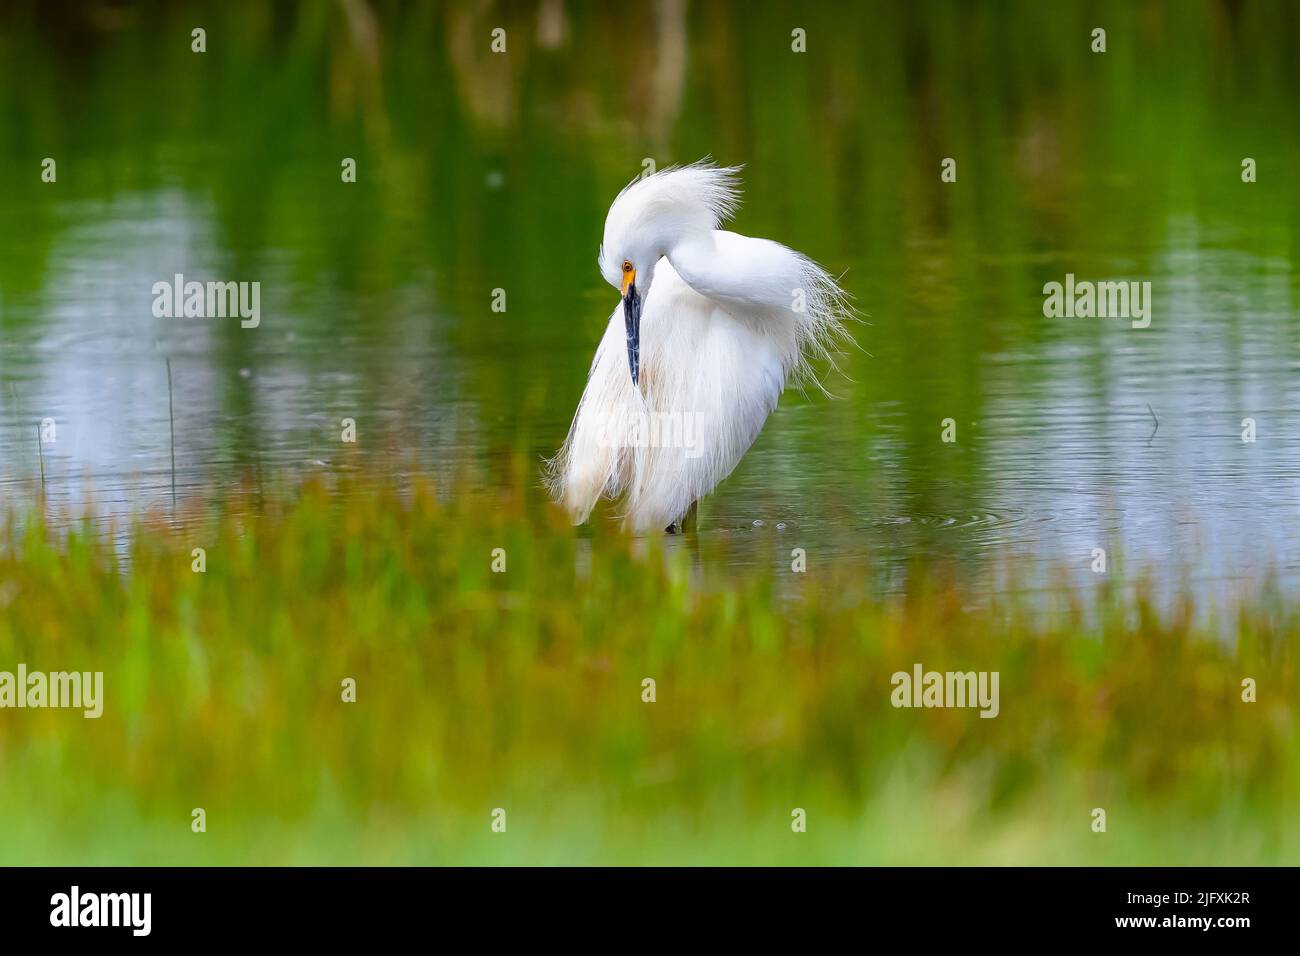 A Snowy Egret in a colorful green pond grooming in shallow water close to reeds. Stock Photo